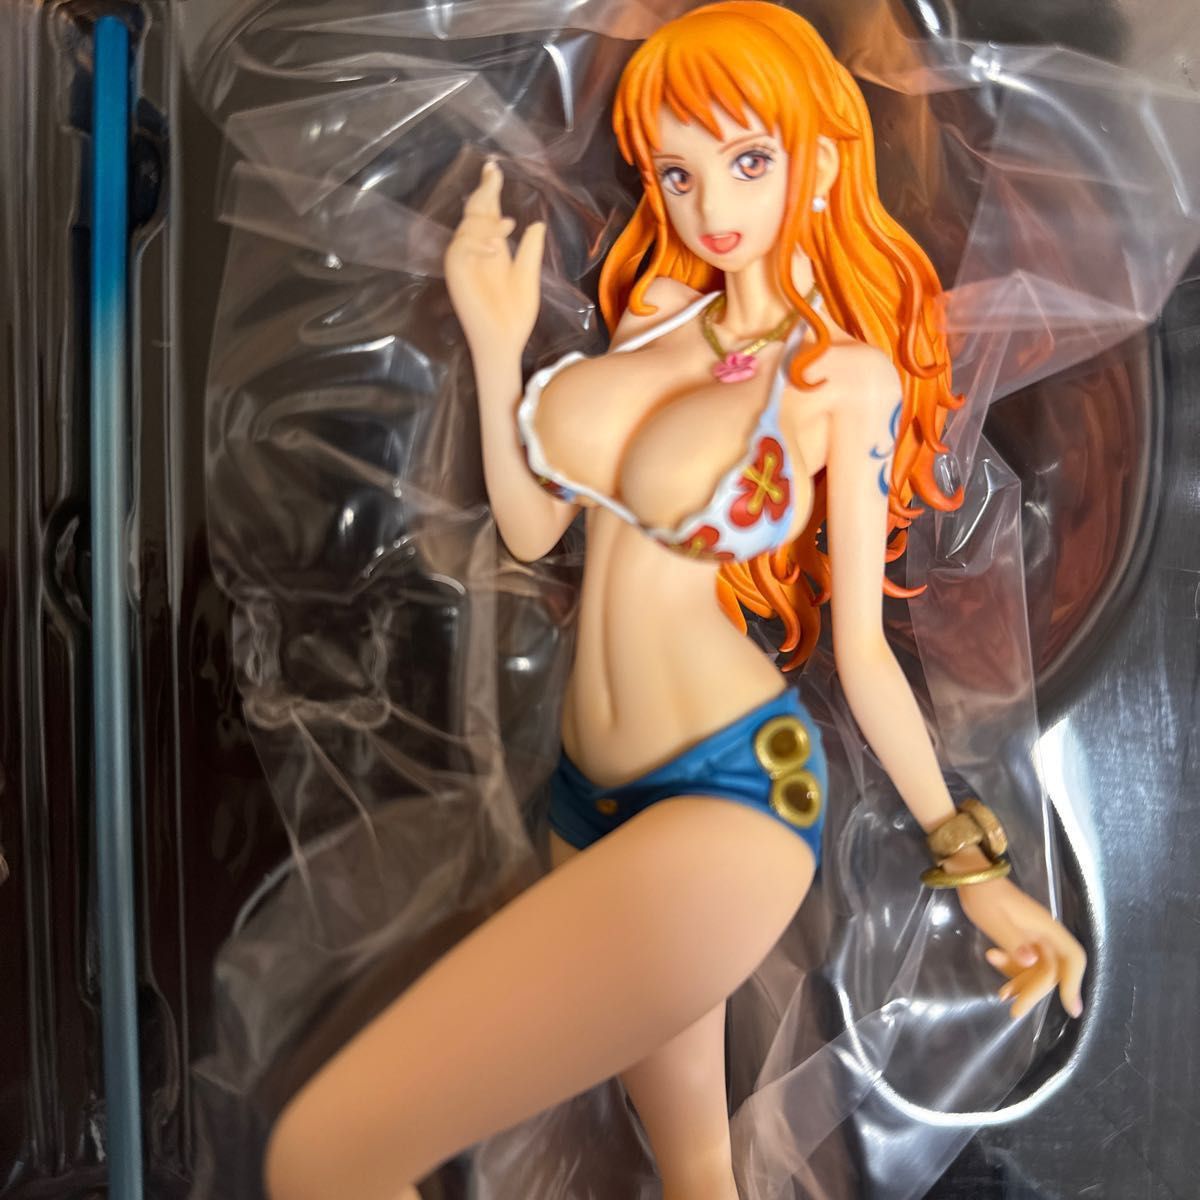 P.O.P NAMI NEW Ver. ONE PIECE LIMITED EDITION メガハウス 完成品